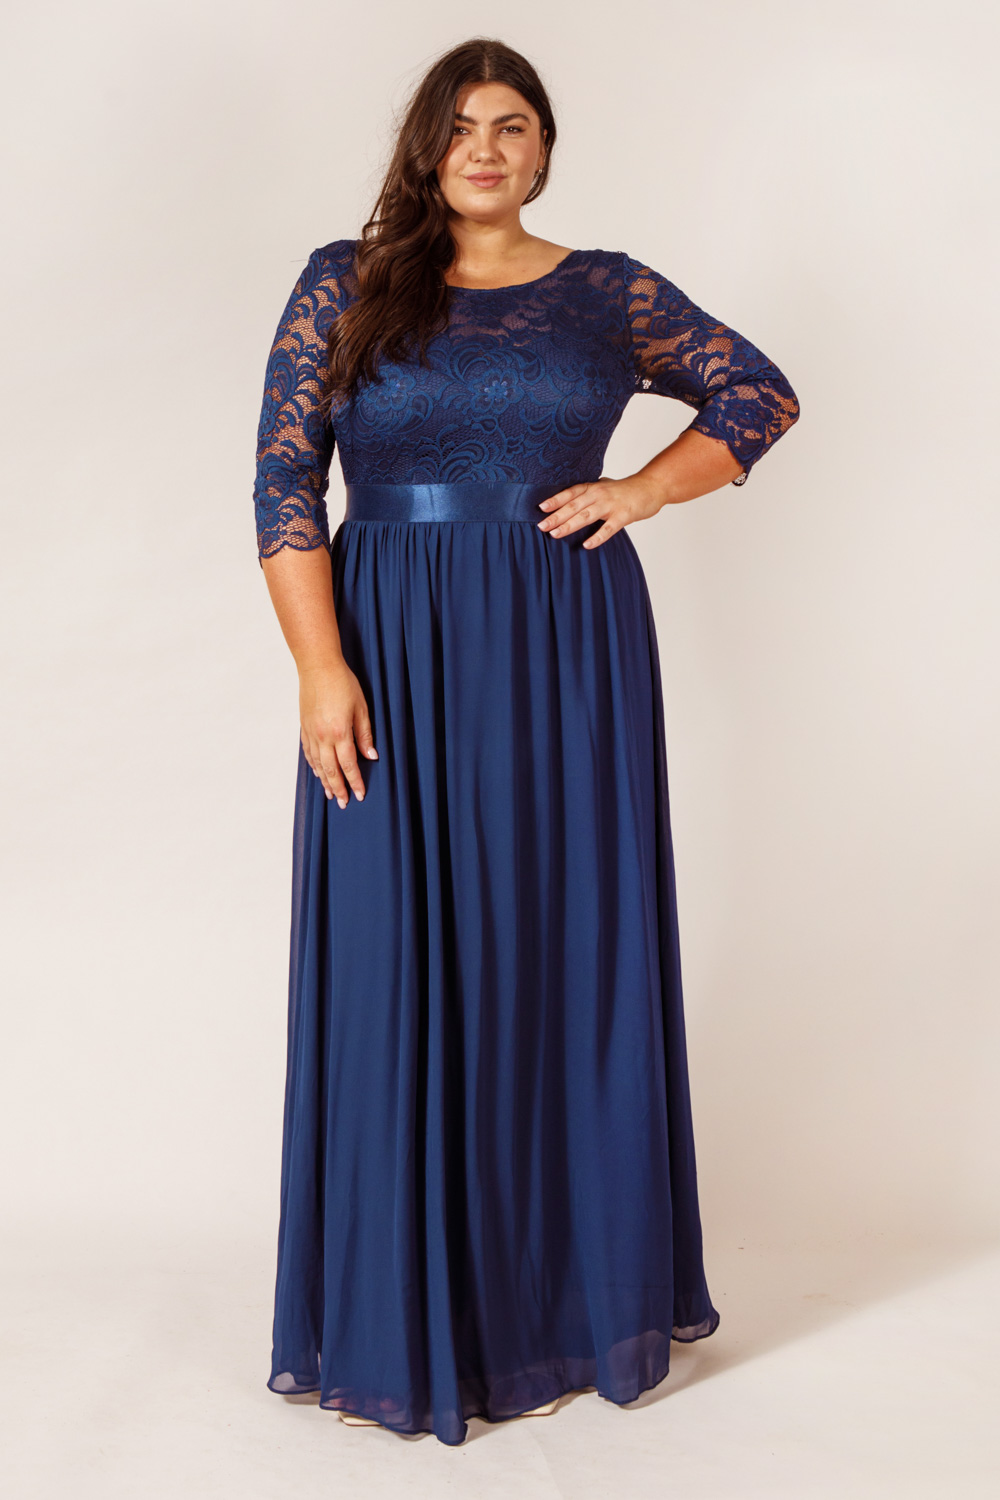 Zoey Navy Bridesmaid Dress by Dressology